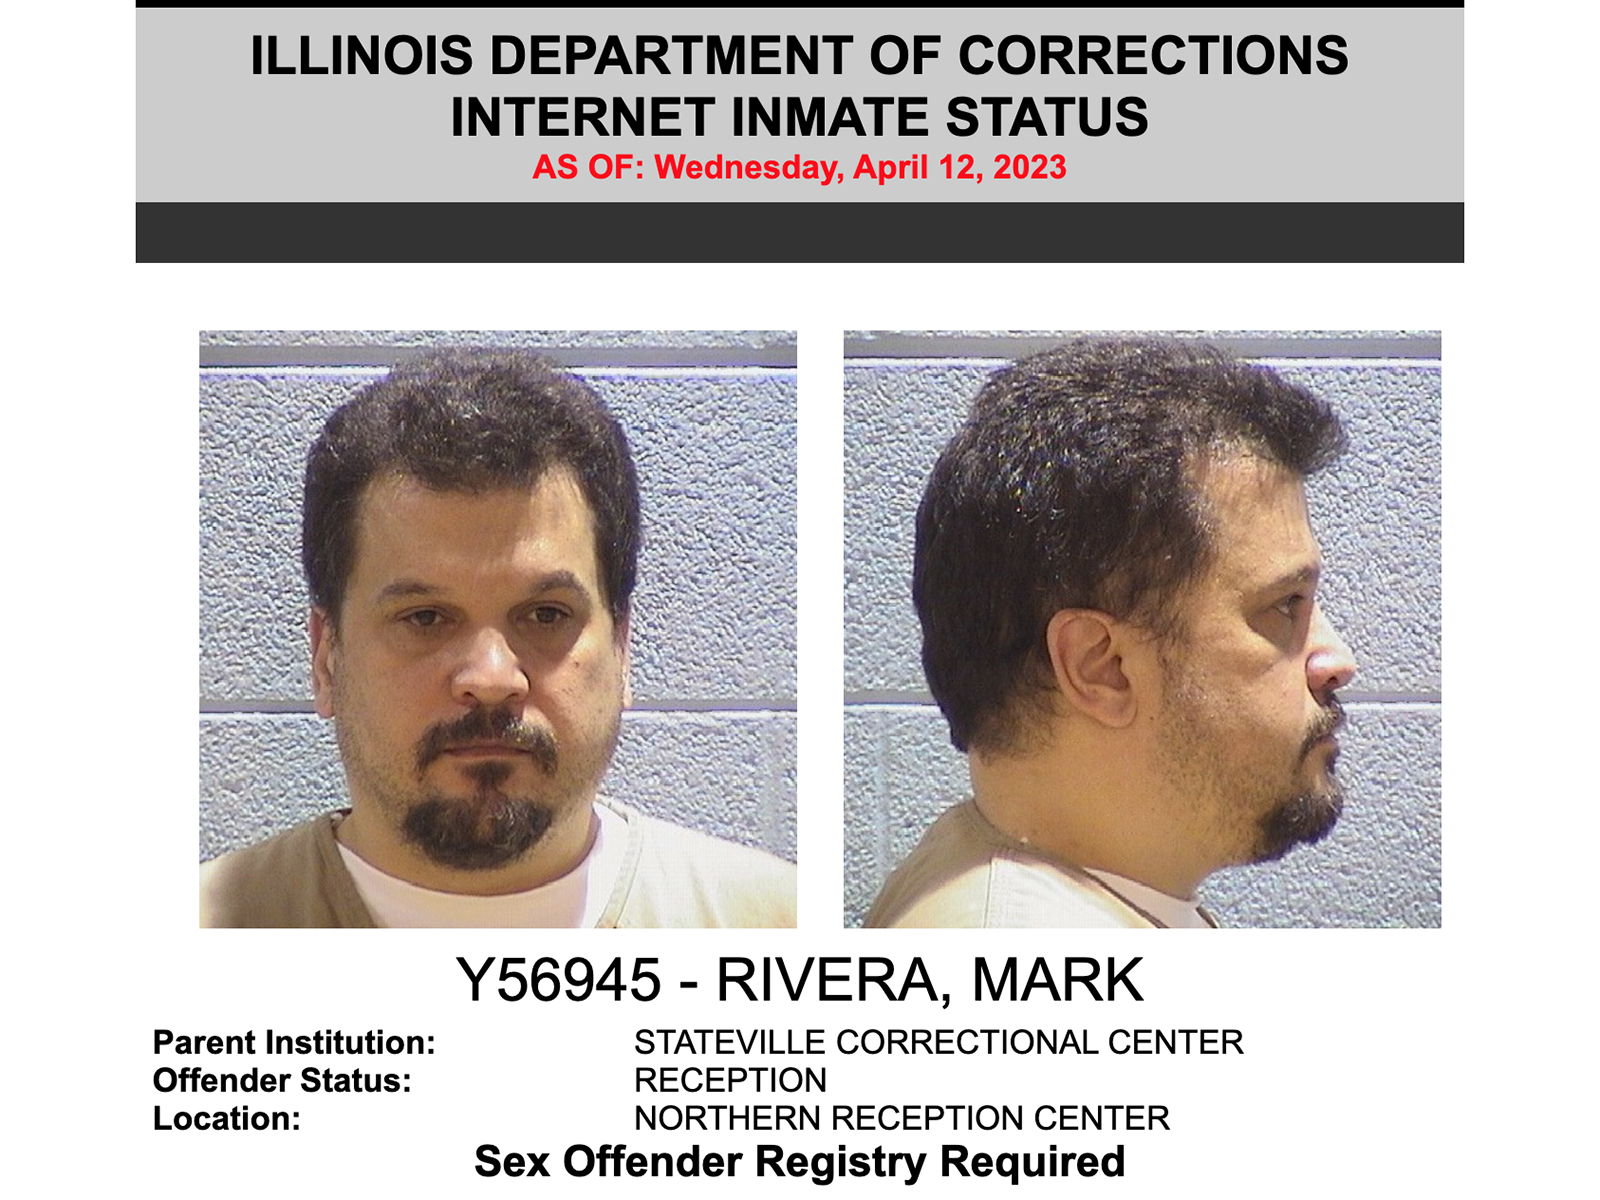 Mark Rivera was admitted to Stateville Correctional Center in Crest Hill, Illinois, on March 24, 2023. Photo via Illinois Department of Corrections